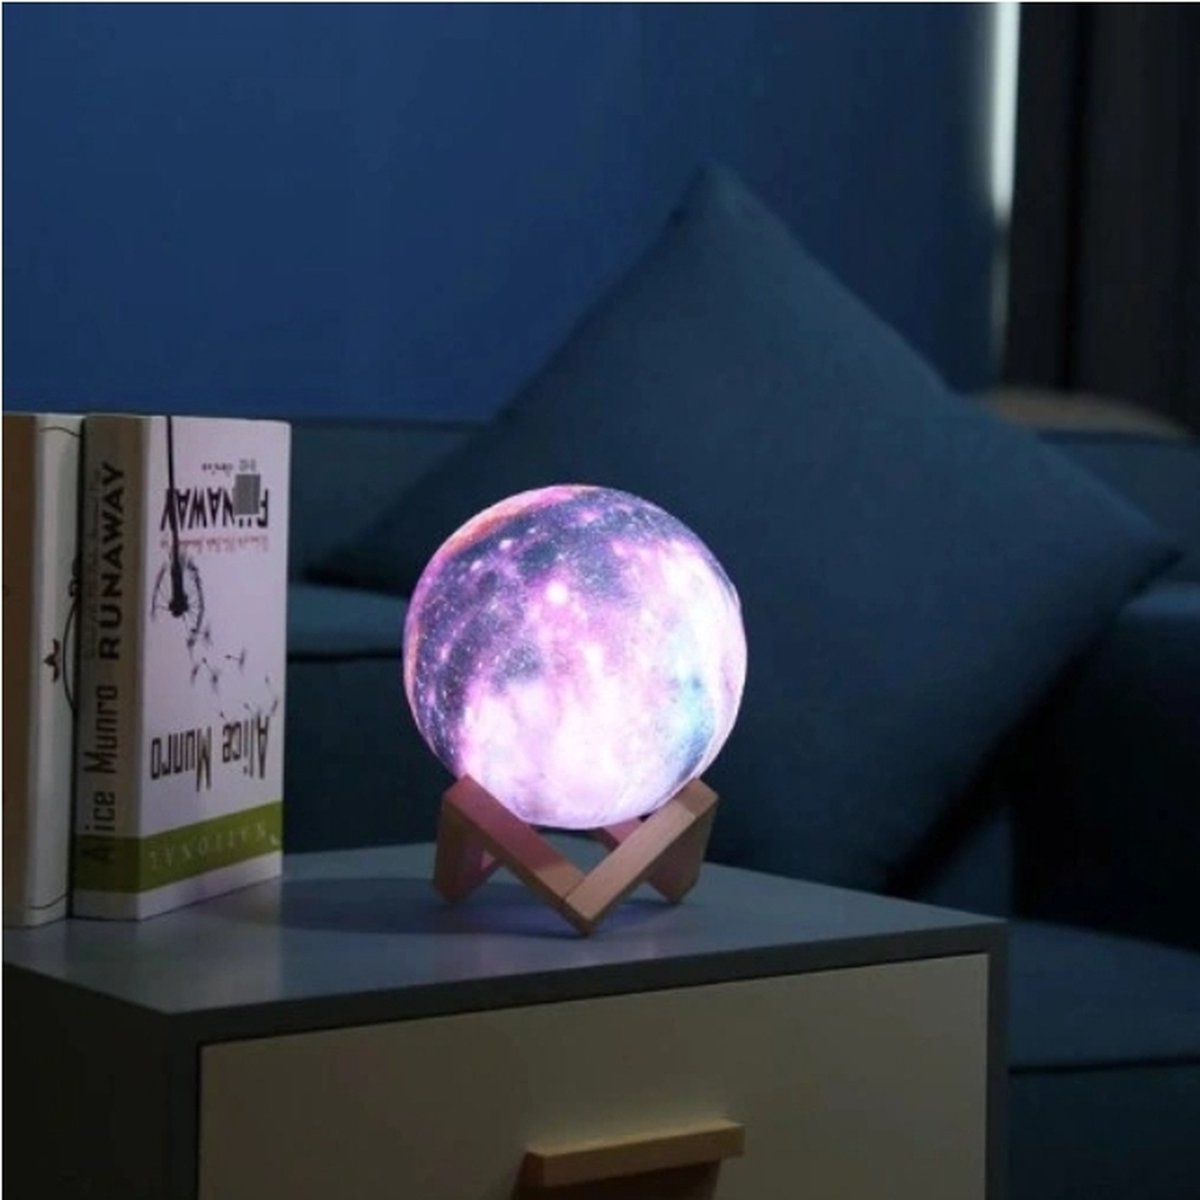 <tc>Ariko</tc> Night lamp 3D moon - star light - 15 cm - Table lamp - Battery 15 to 89 hours - 16 dimmable LED colors and remote control